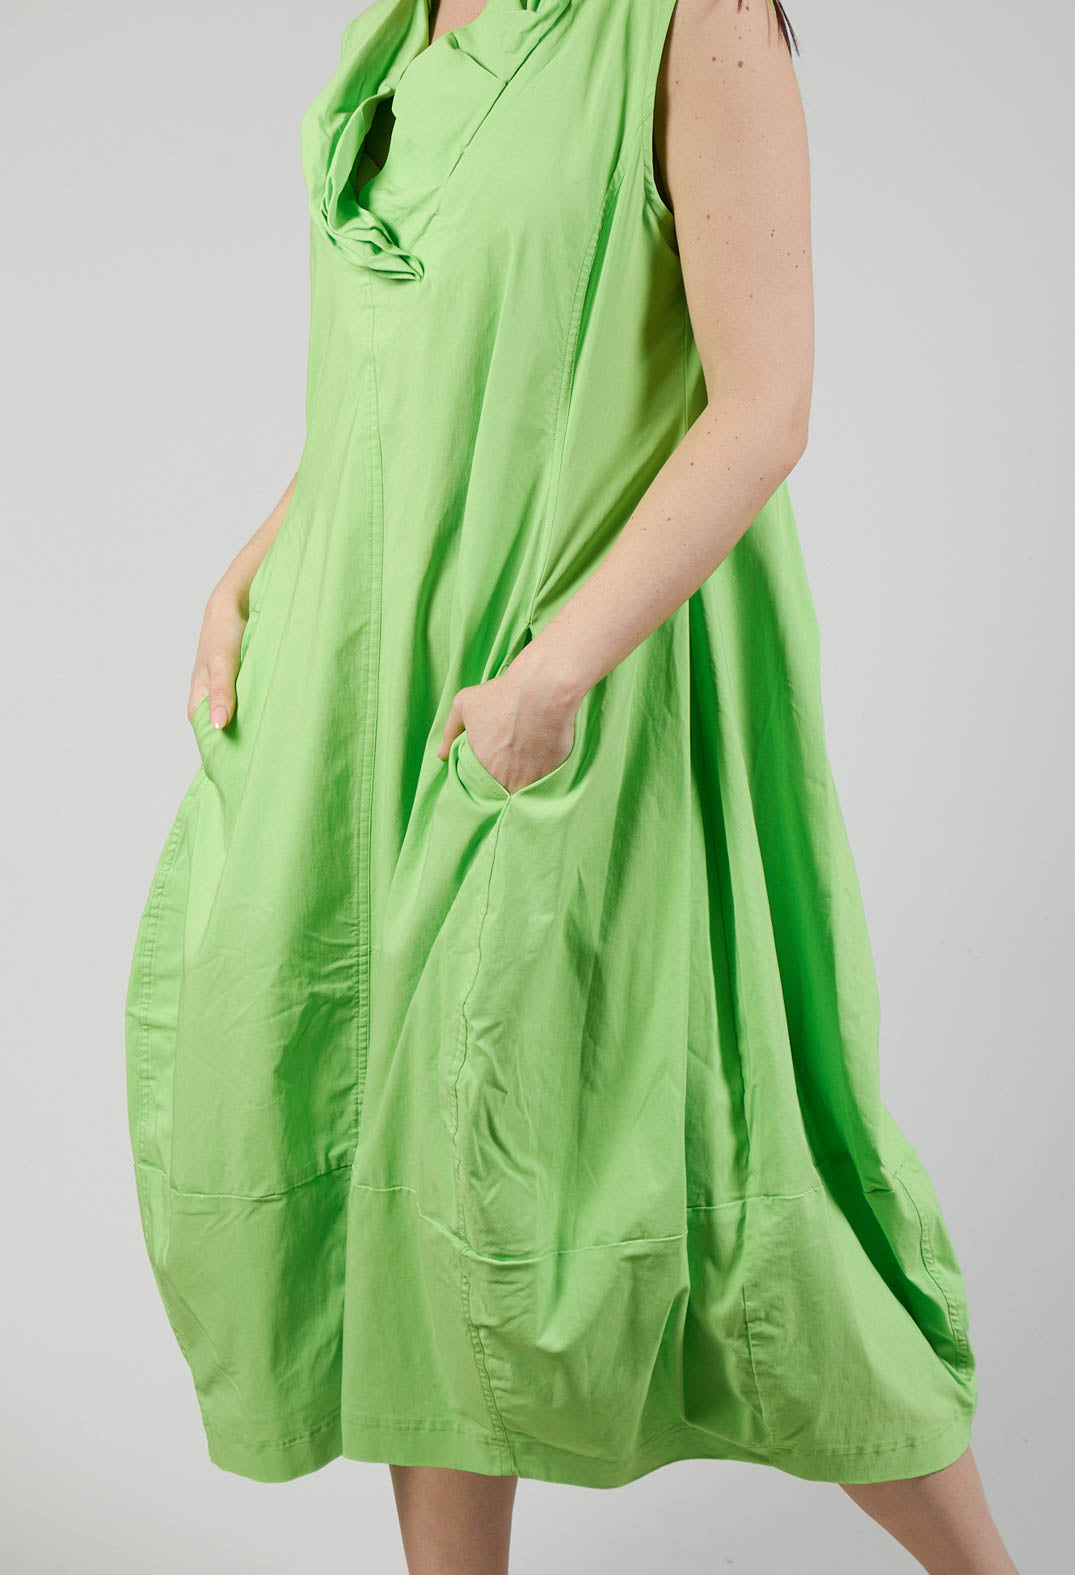 Sleeveless Dress with Feature Neckline in Lime